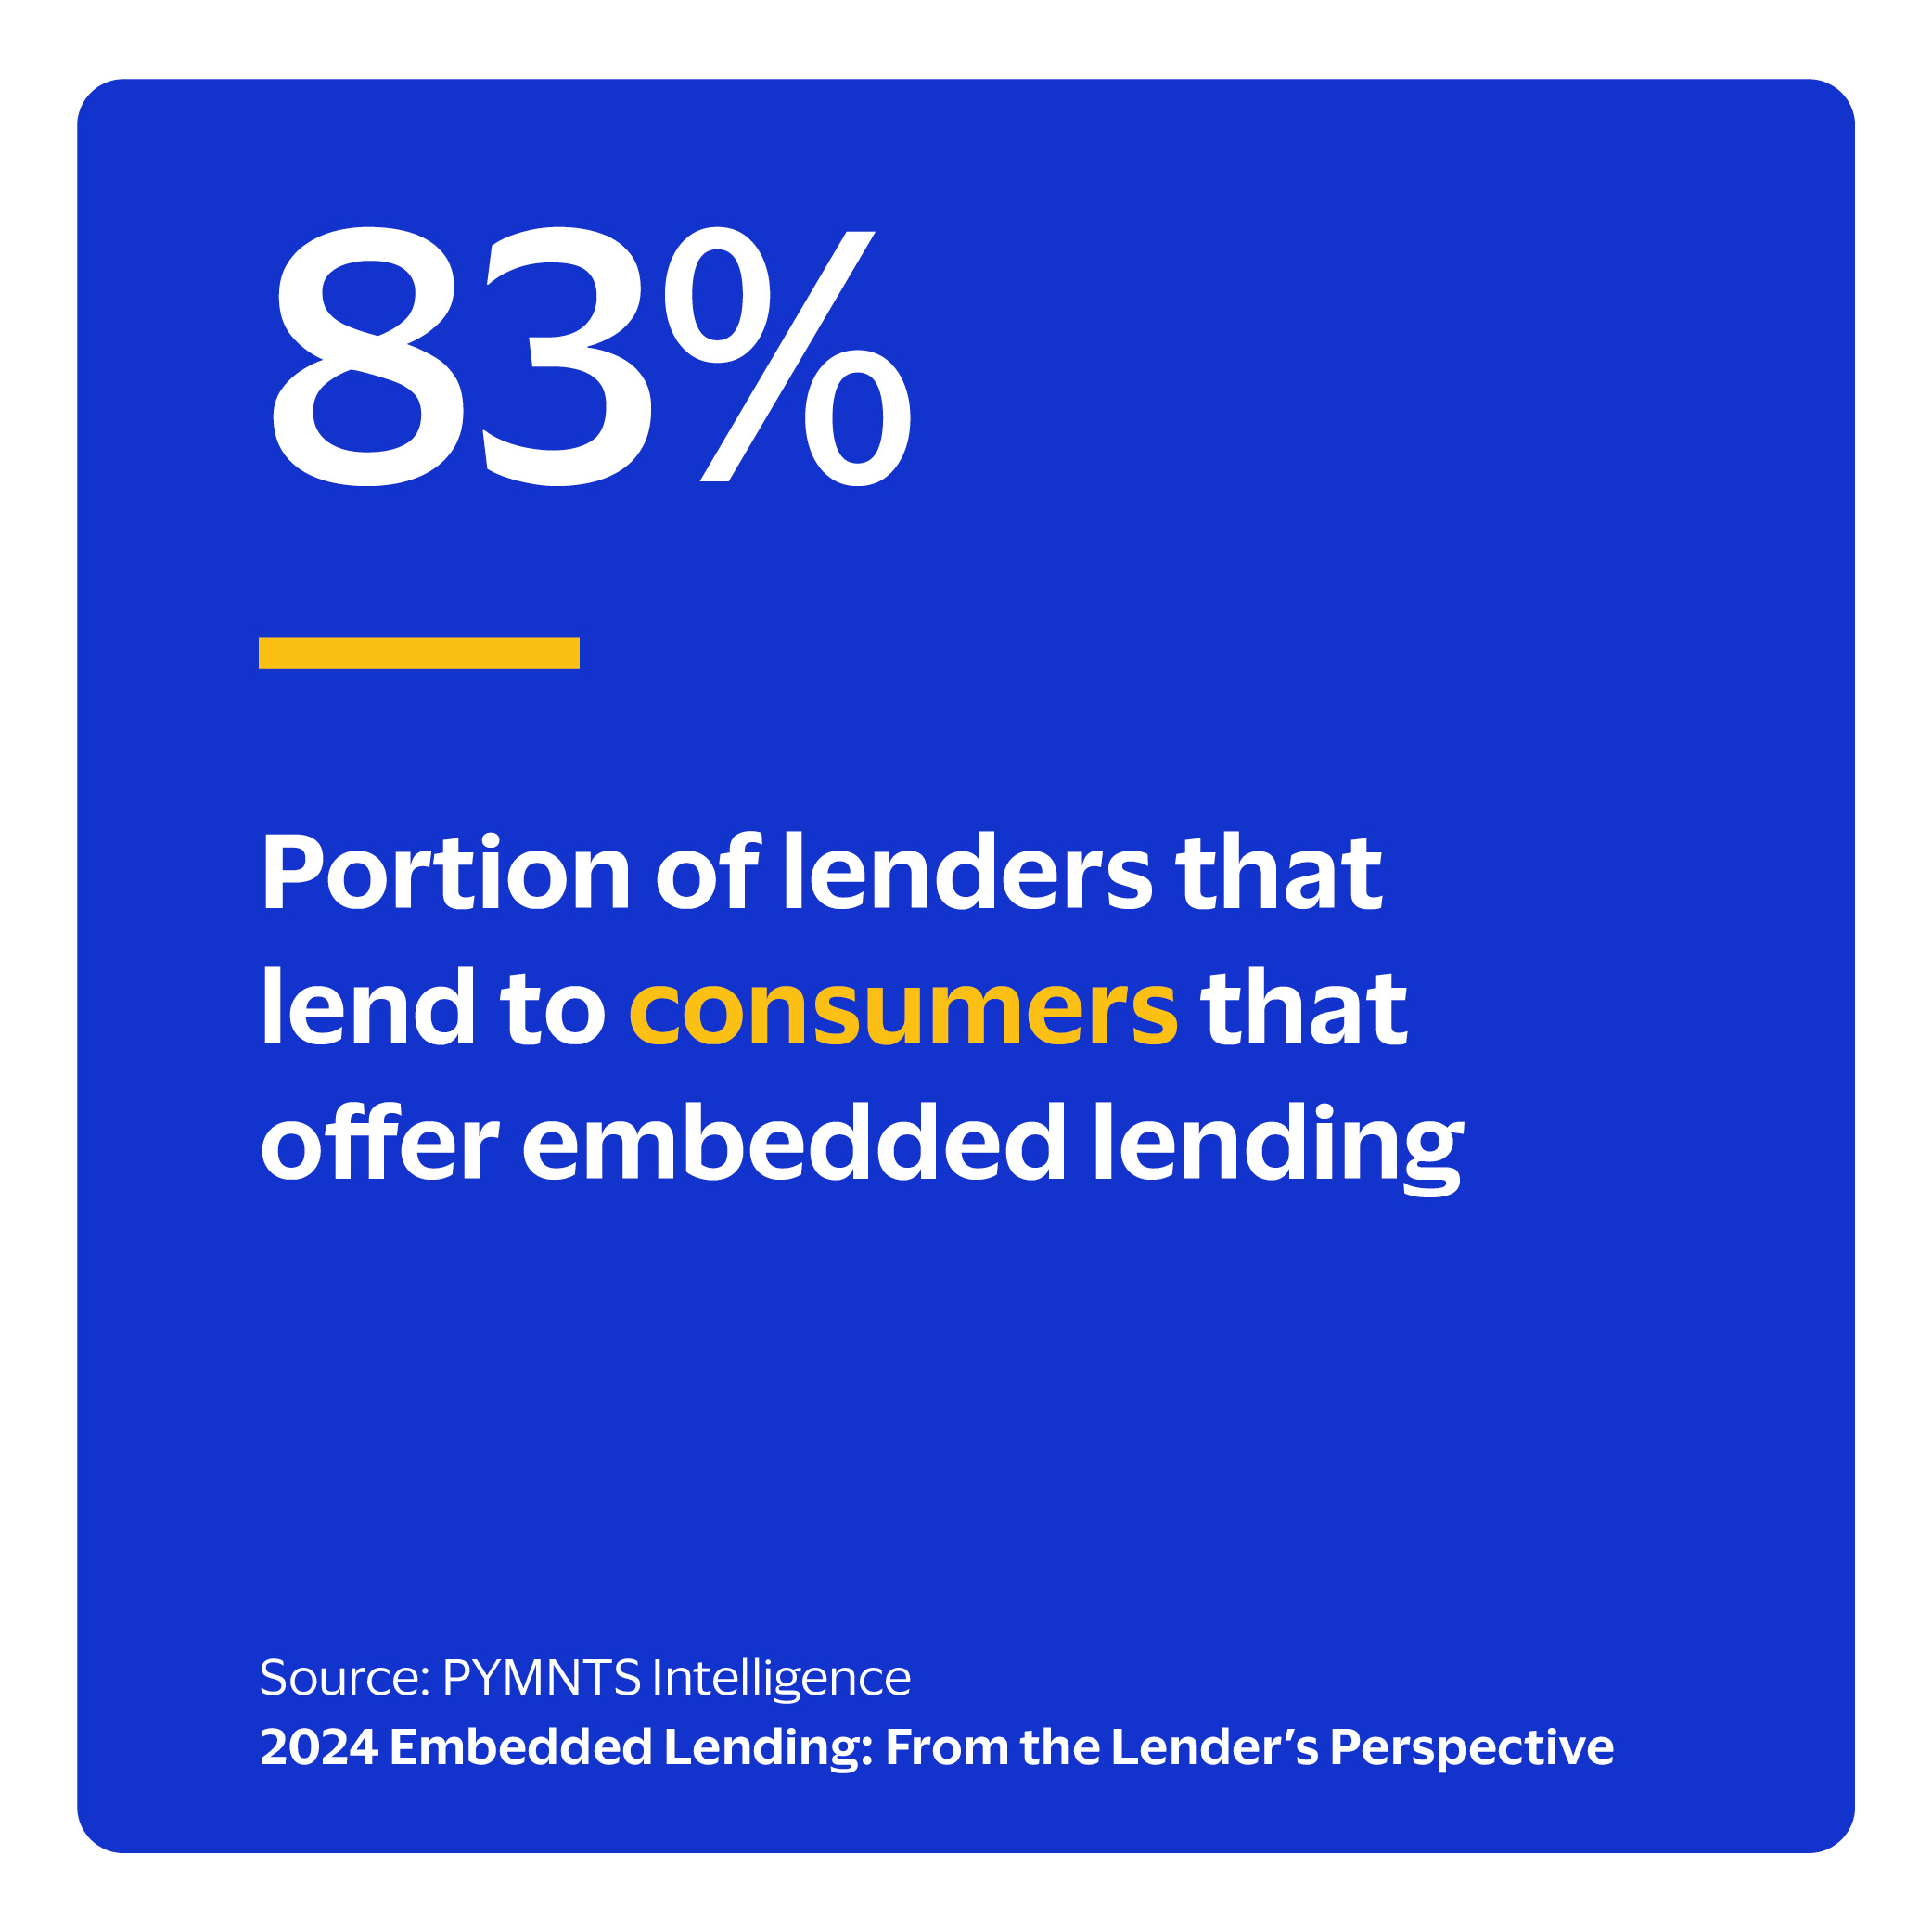 83%: Portion of lenders that lend to consumers that offer embedded lending